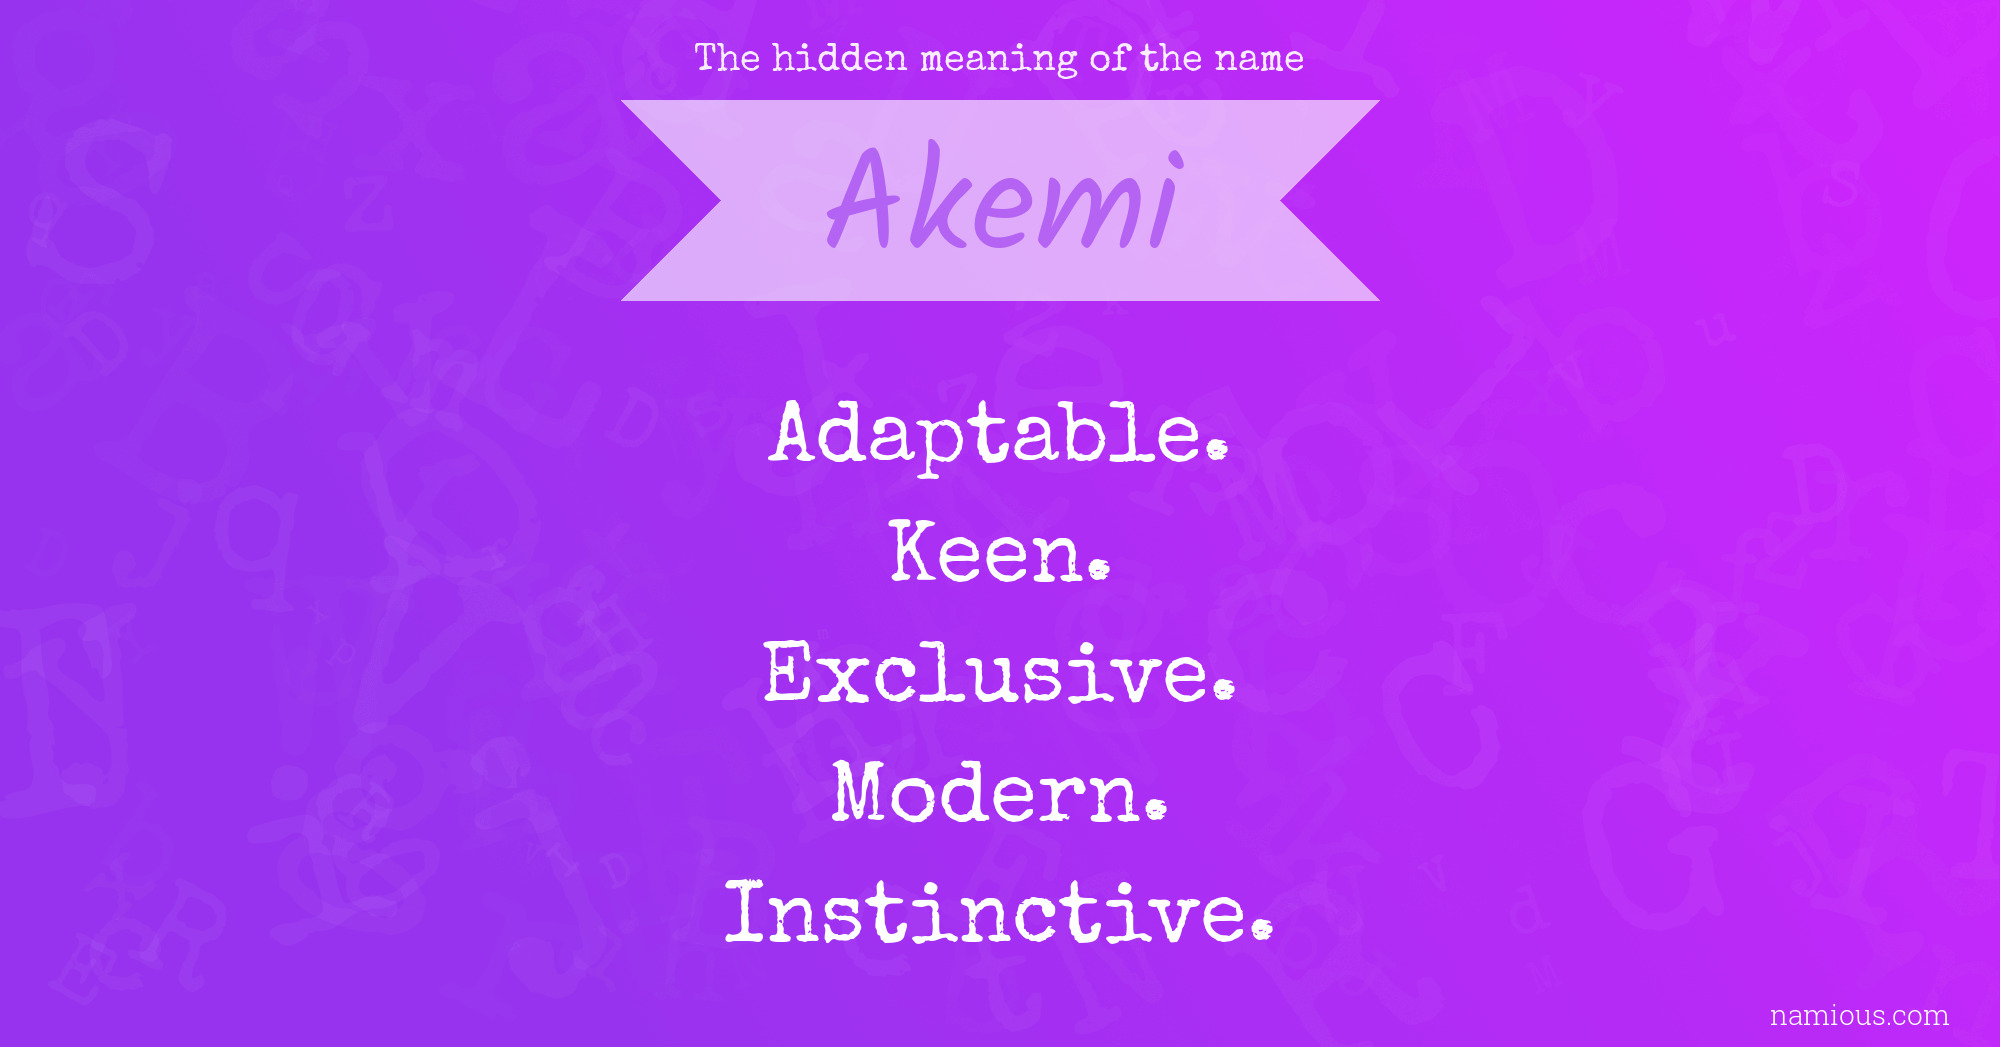 The hidden meaning of the name Akemi